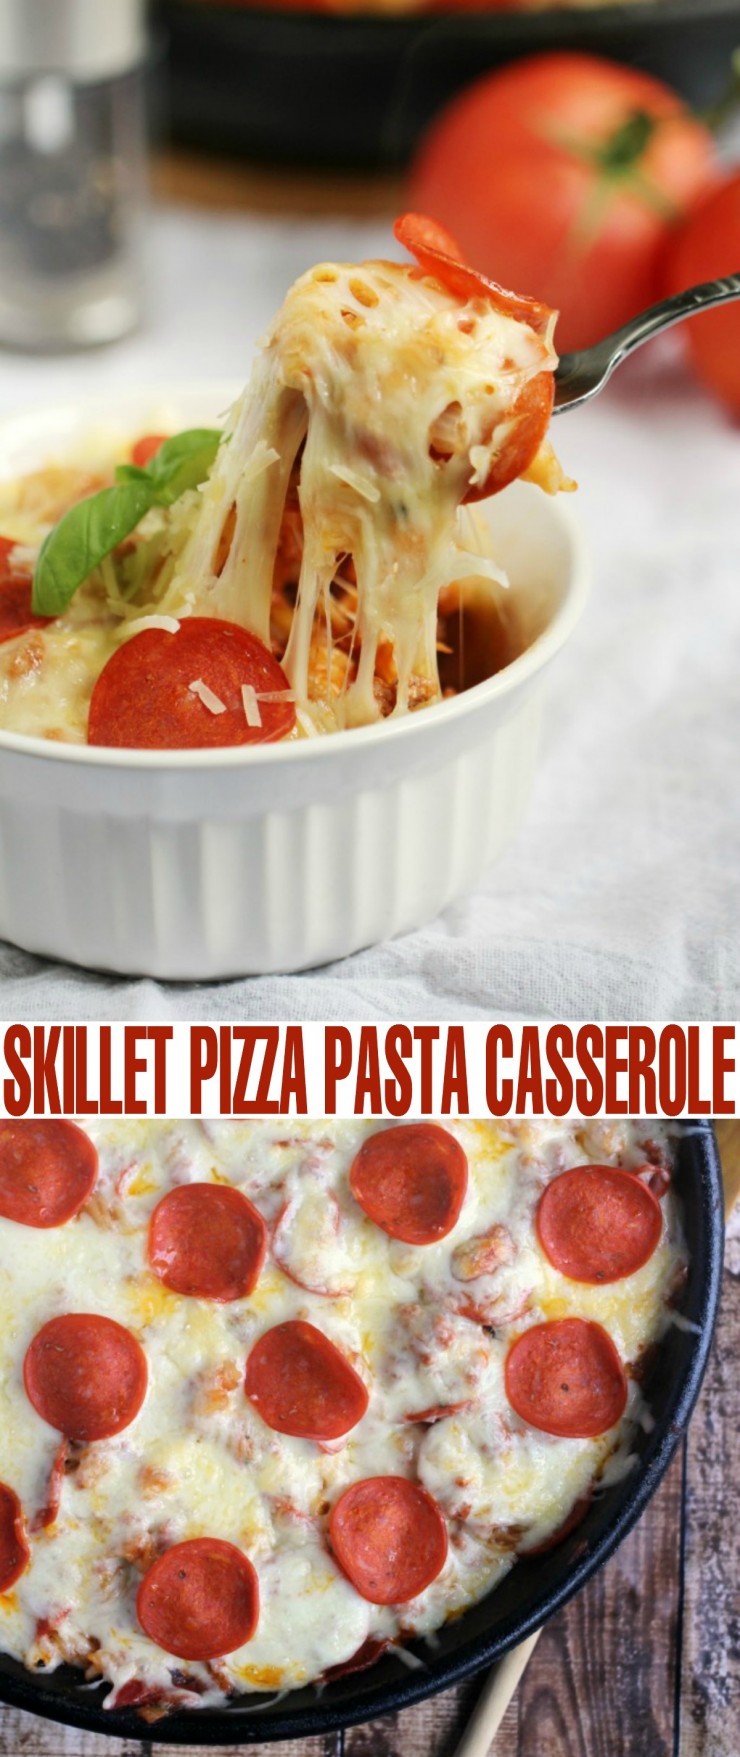 This Skillet Pizza Pasta Casserole is a one pot dish perfect for family dinner, this is food for kids that adults will love too. Easy!